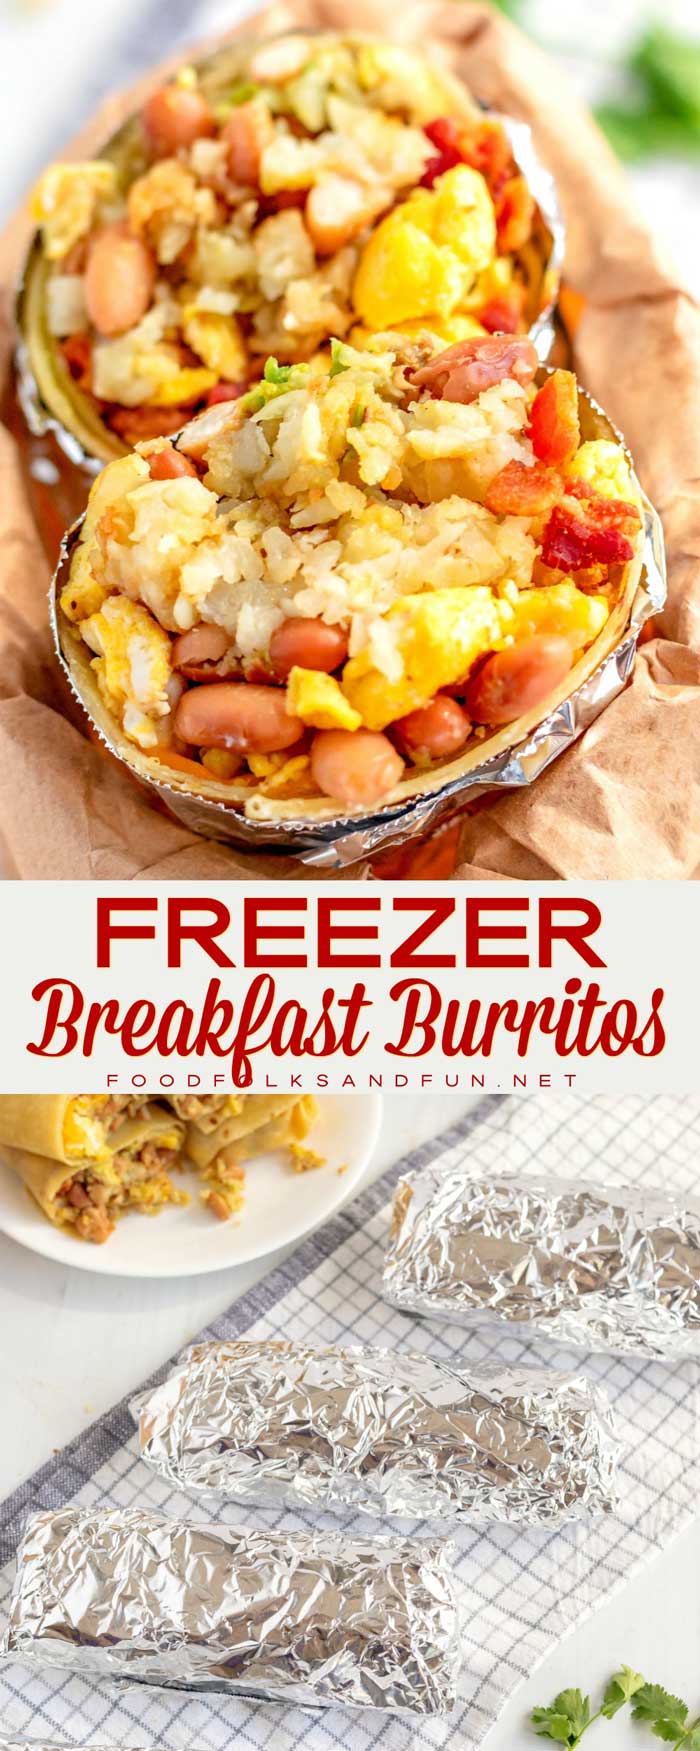 These freezer Breakfast Burritos are massive and stuffed with eggs, cheese, bacon, crispy potatoes, guacamole, and my secret ingredient that makes them incredible! #breakfast #bacon #breakfastburritos #burrito #comfortfood #FreezerMeal #FreezerBreakfast #foodfolksandfun via @foodfolksandfun